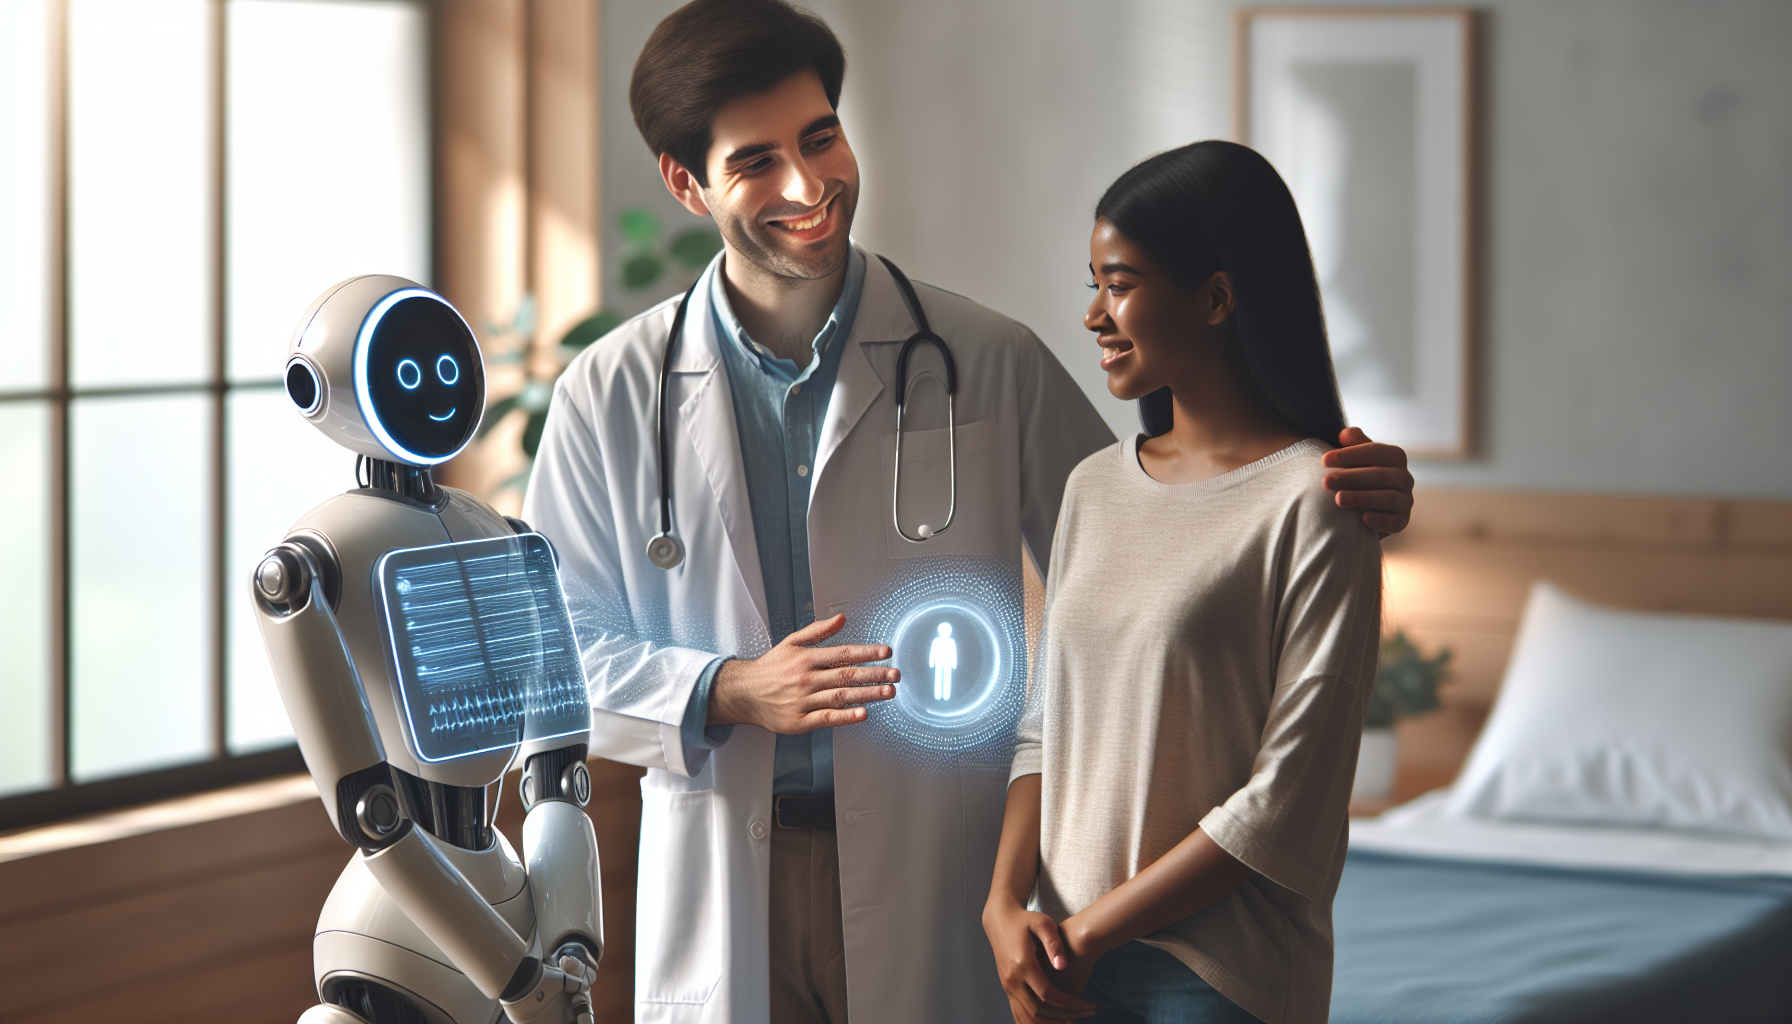 Illustration of human medical professionals and AI collaboration